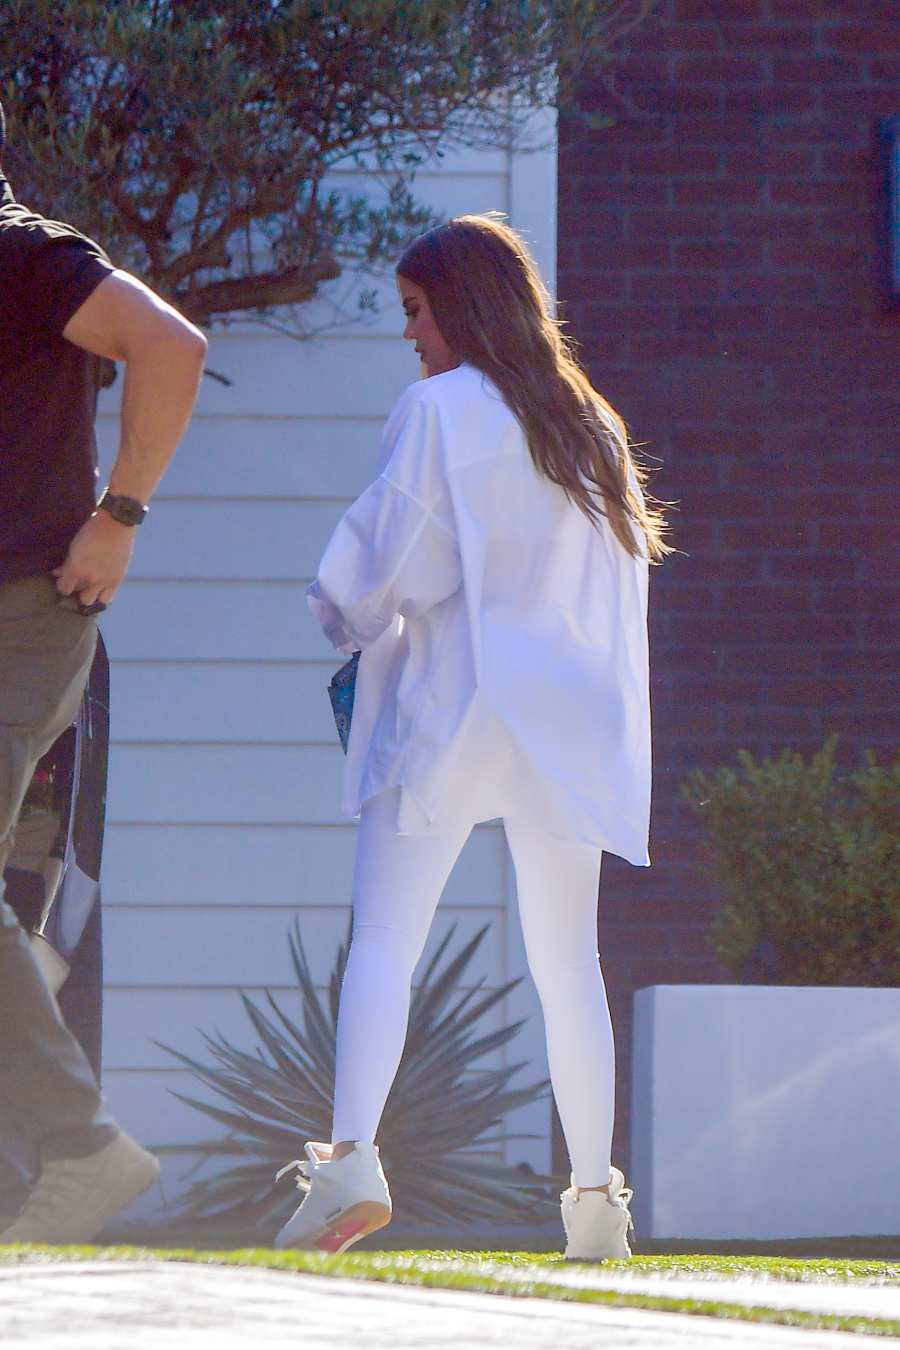 Khloe and Kourtney Kardashian Kris Jenner Attend July 4 Party at Tristan Thompson s L A Home